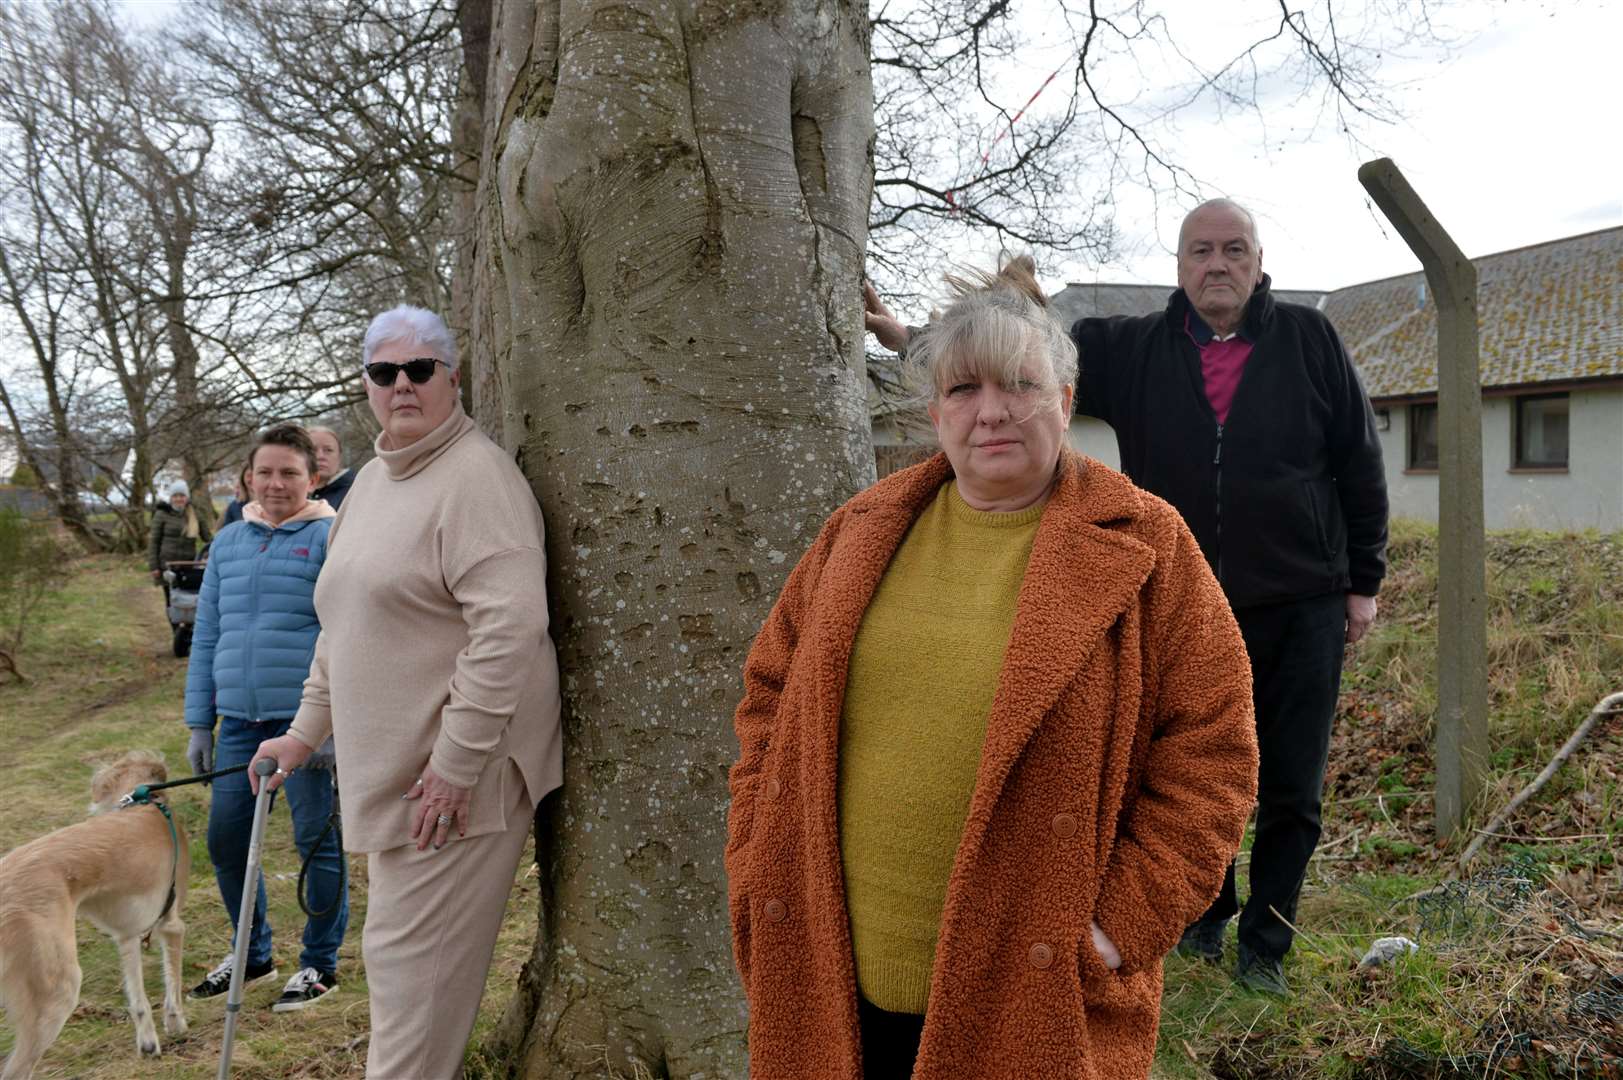 Denise Stewart-Thomson (centre) was a leading opponent of the plans when they were first announced, threatening local trees.